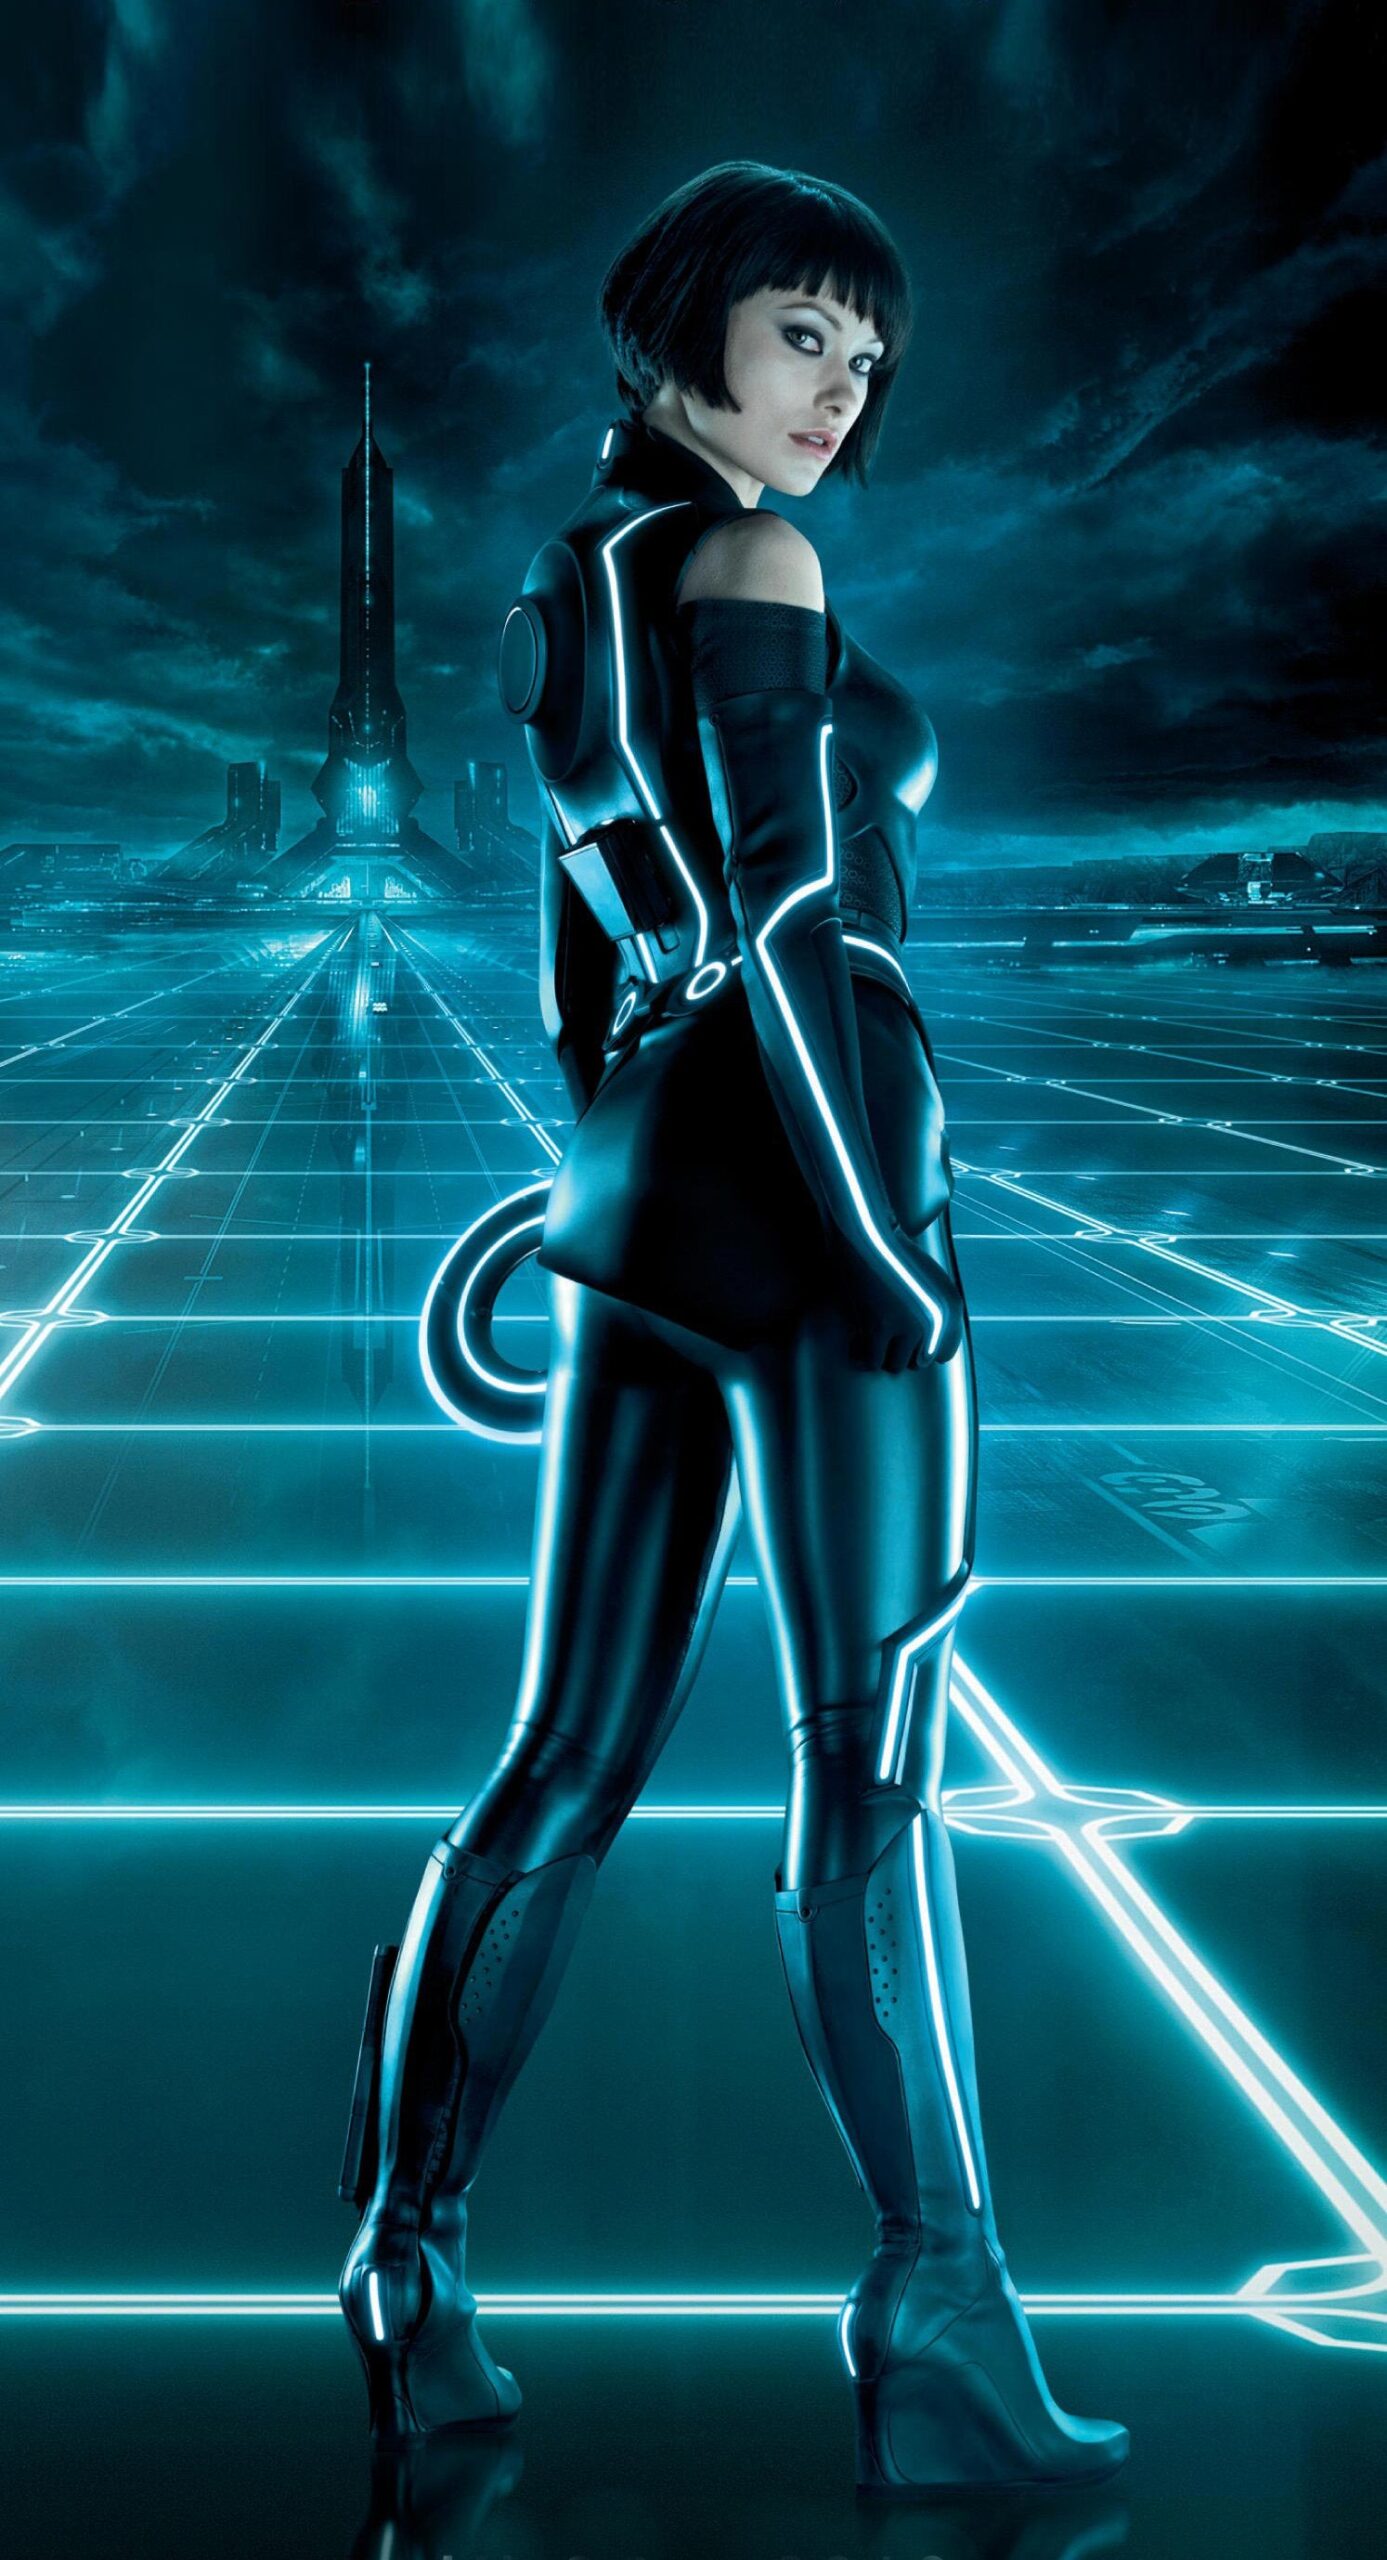 Olivia Wildes character in Tron Legacy was made to take